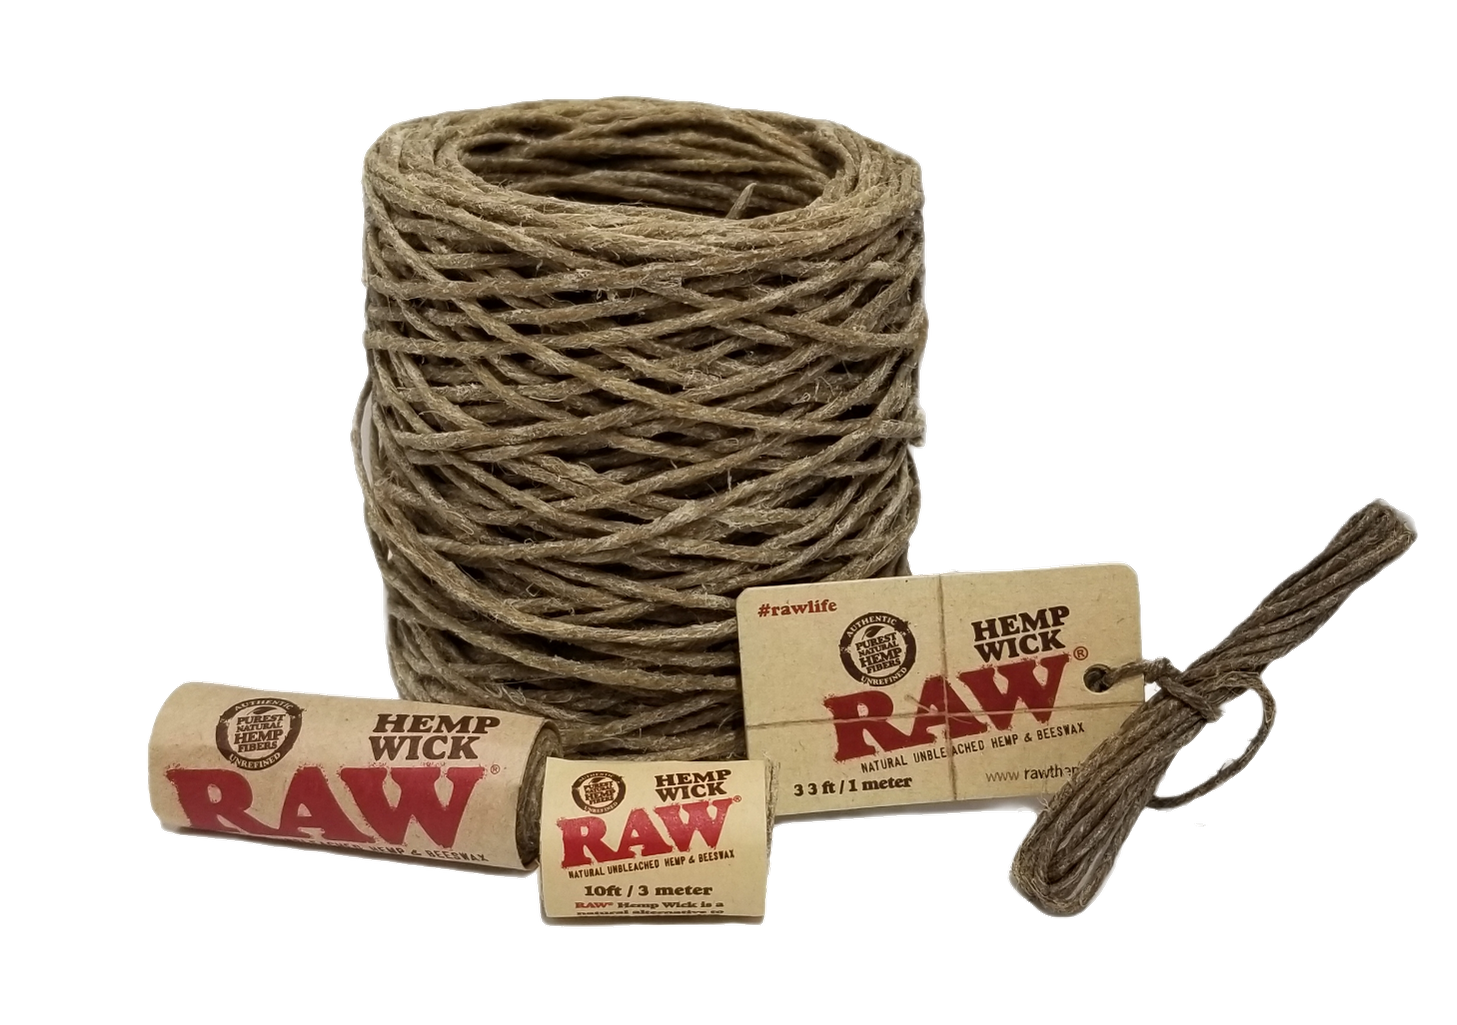 What's so special about Hemp Wick? – The Wee Smoke Shop